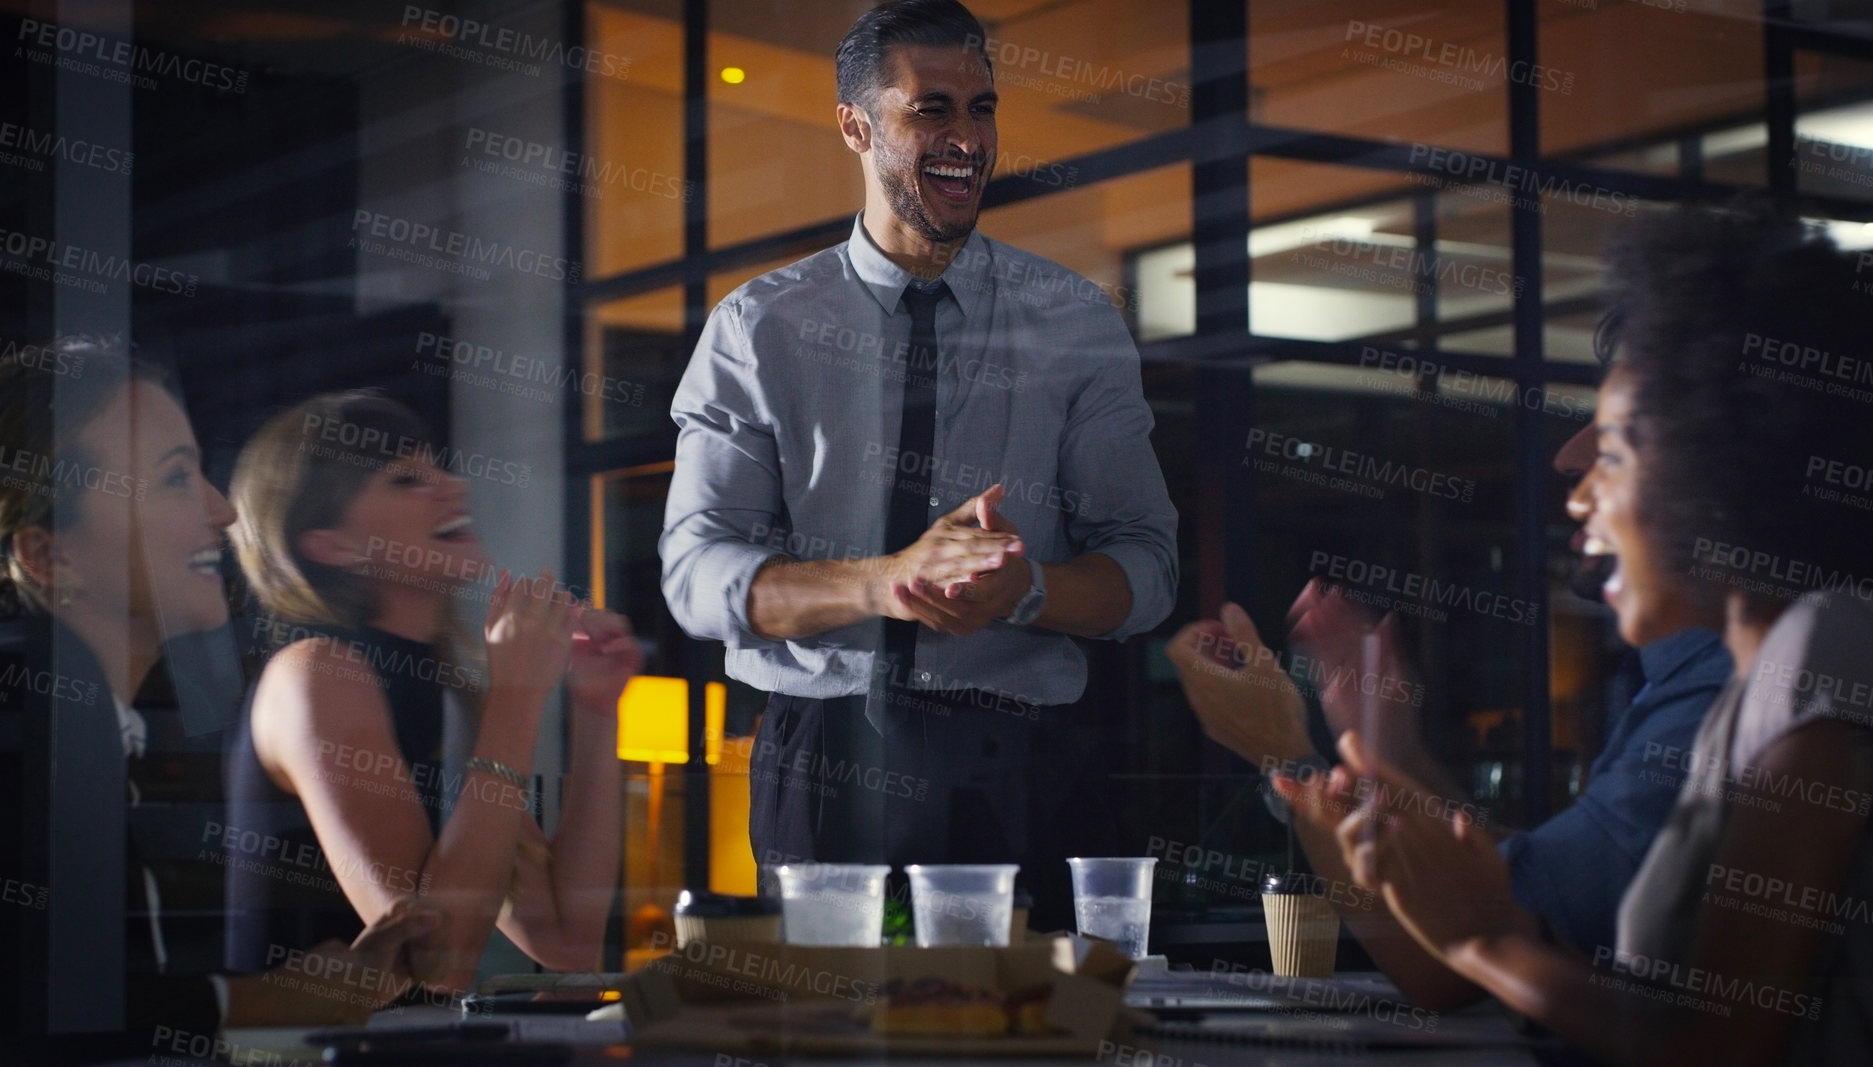 Buy stock photo Cropped shot of a diverse group of businesspeople clapping after a successful meeting in the office late at night